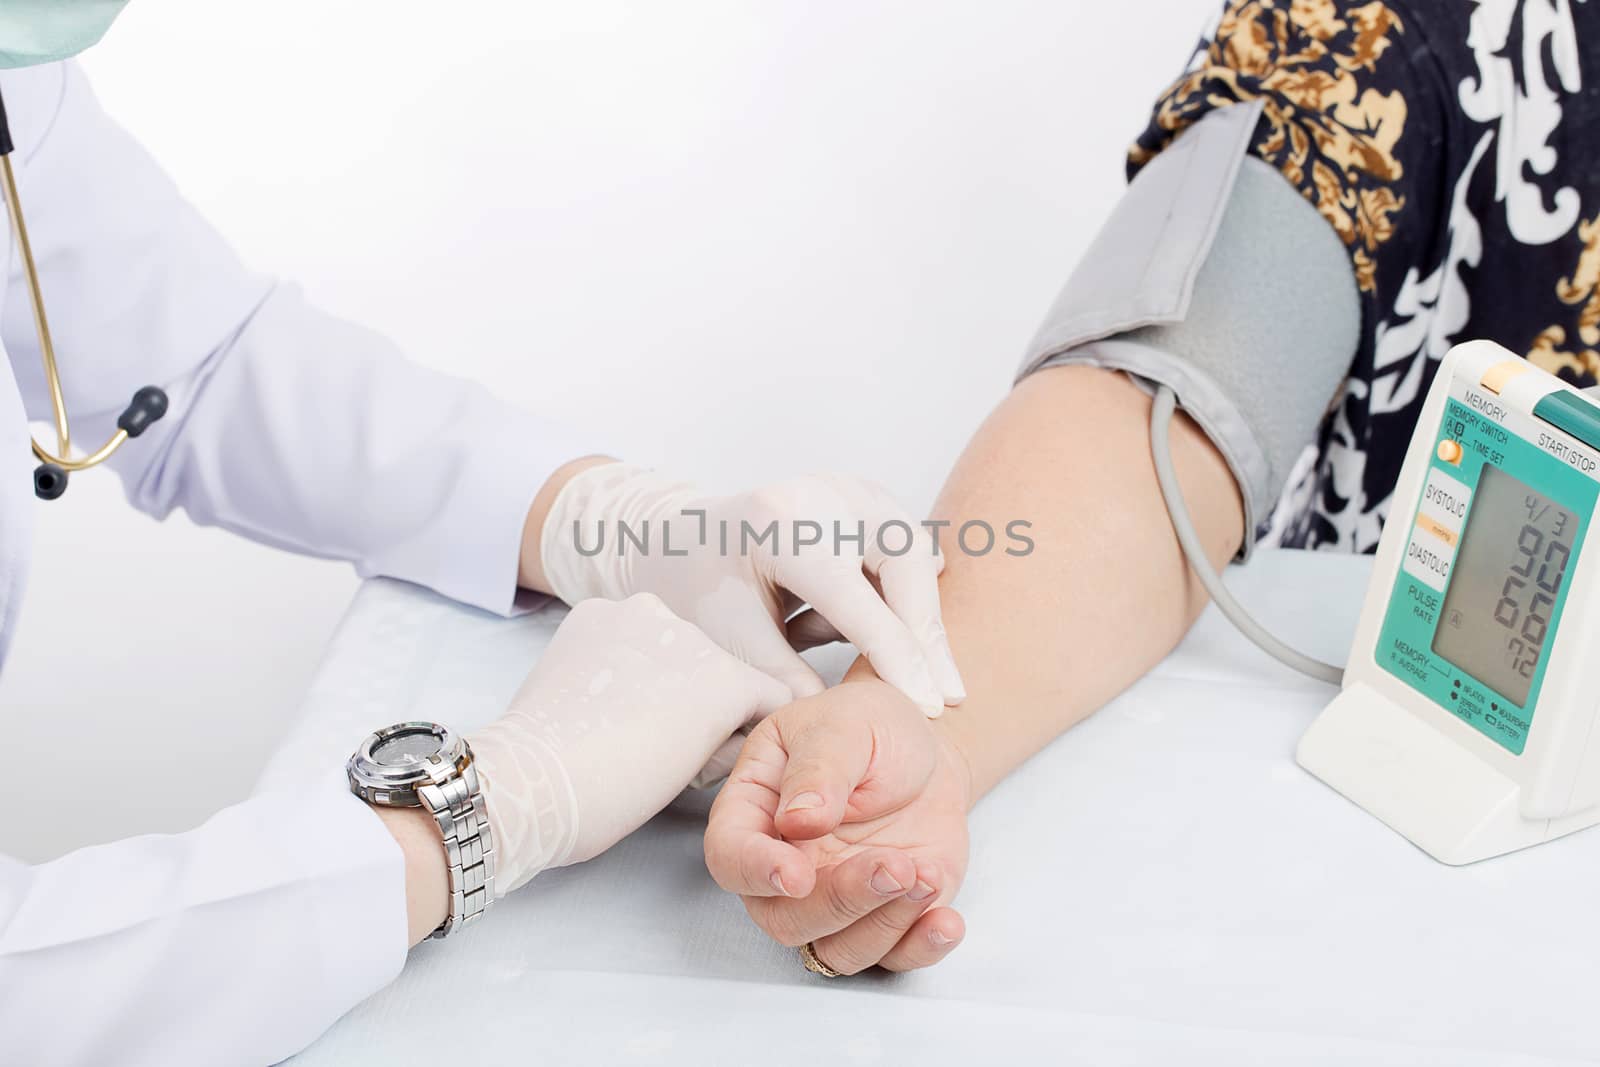 Doctor checking pulse of patient with stethoscope  on table isol by jayzynism